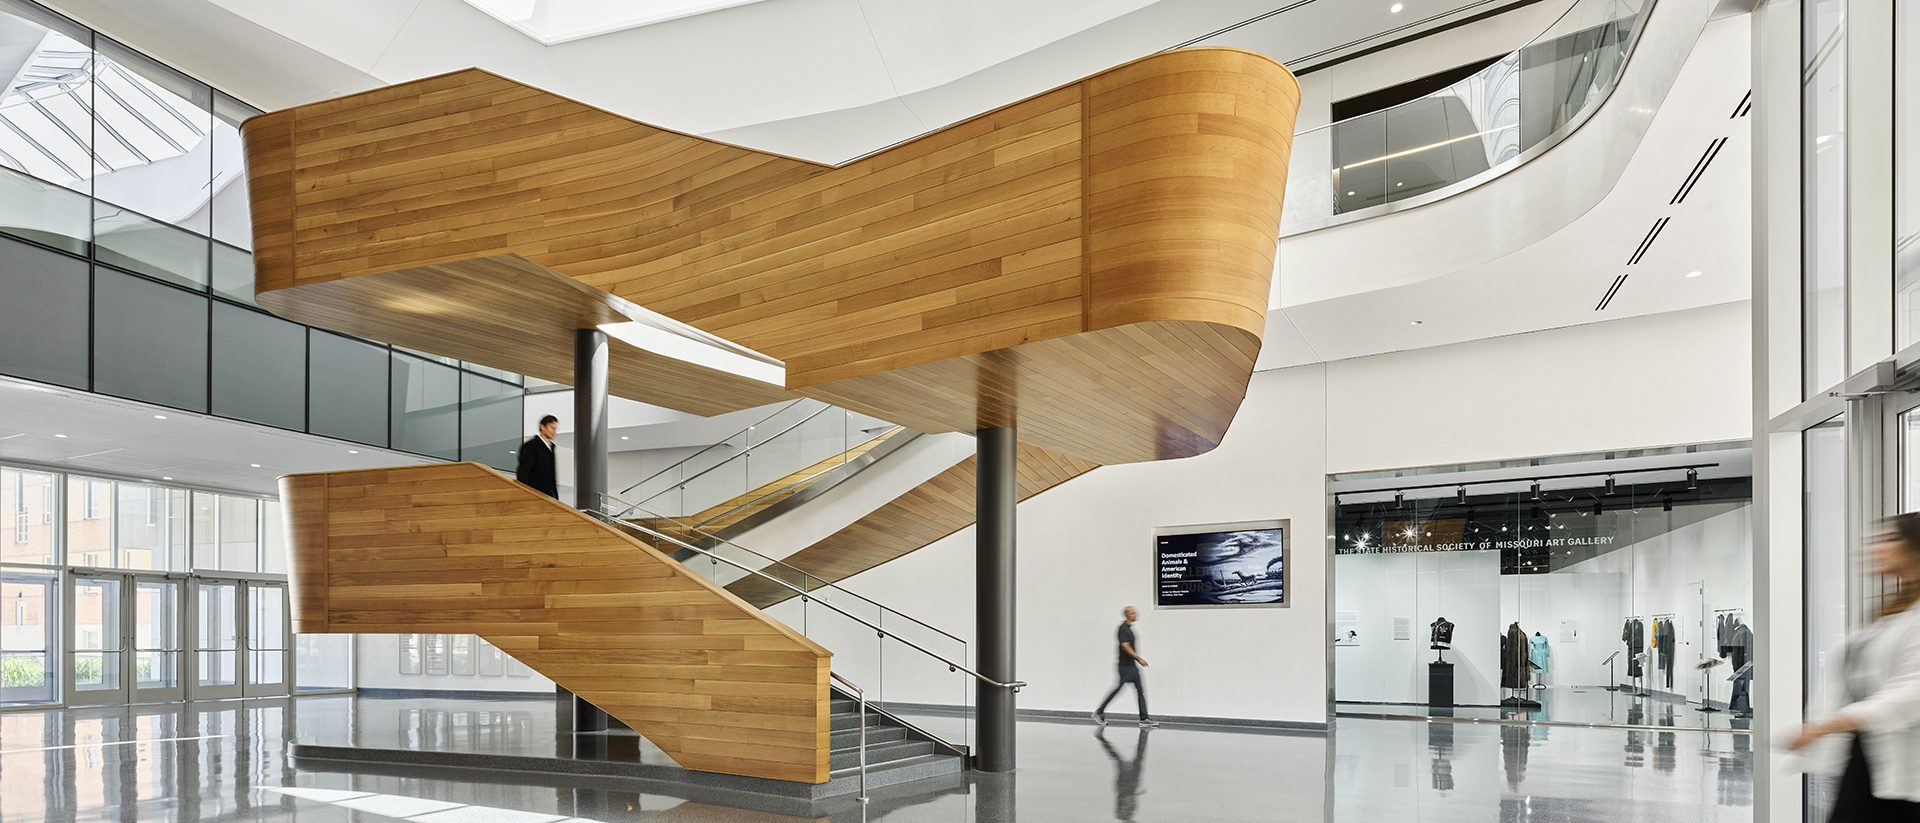 Image of the interior lobby of the SHSMO Center for Missouri Studies featuring a central wooden-clad sculptural staircase.